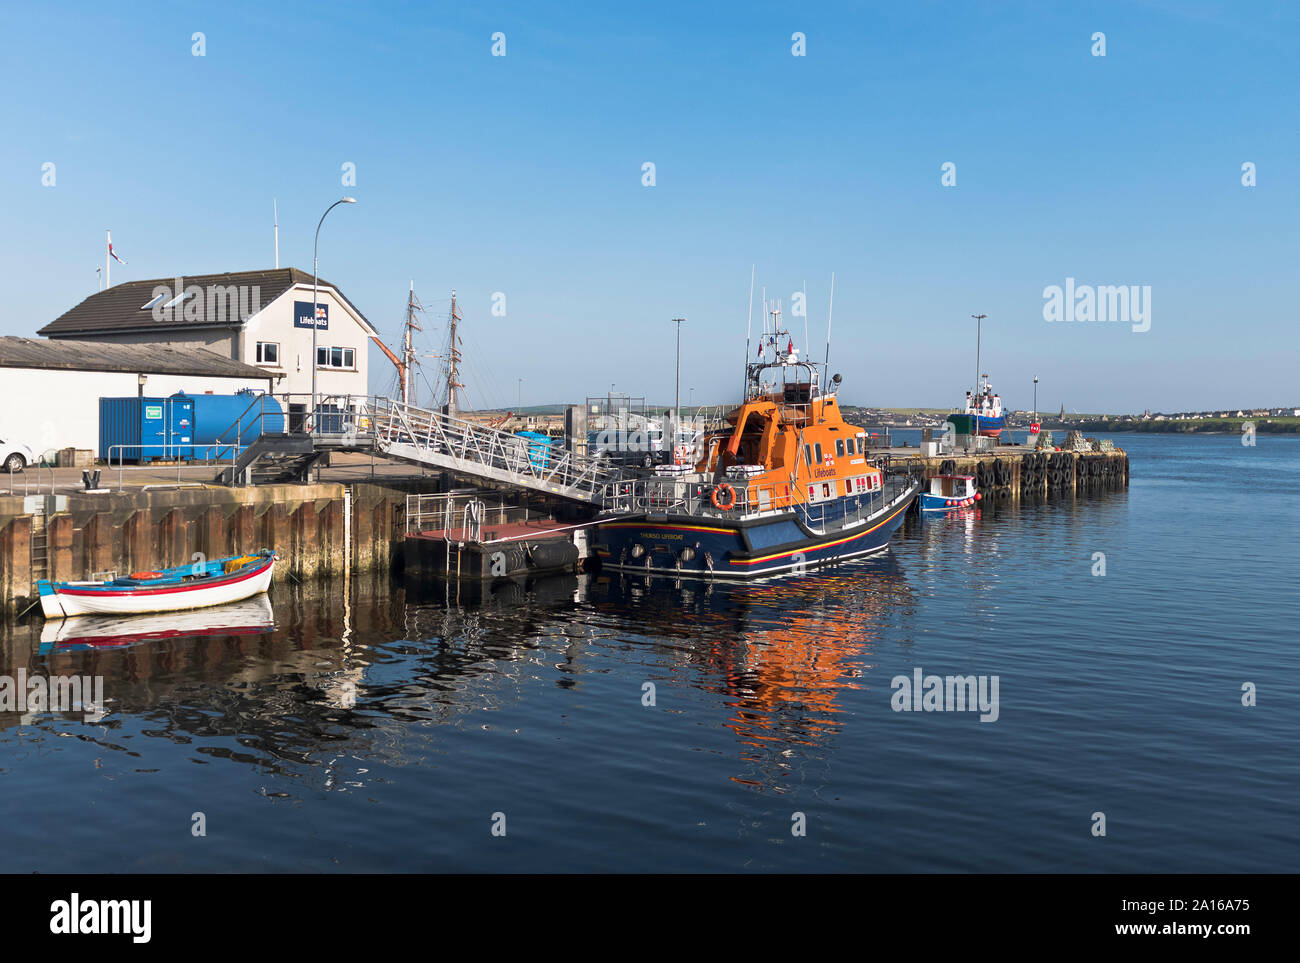 dh Scrabster harbour THURSO CAITHNESS Lifeboat station boat scotland uk rnli rnlb Stock Photo